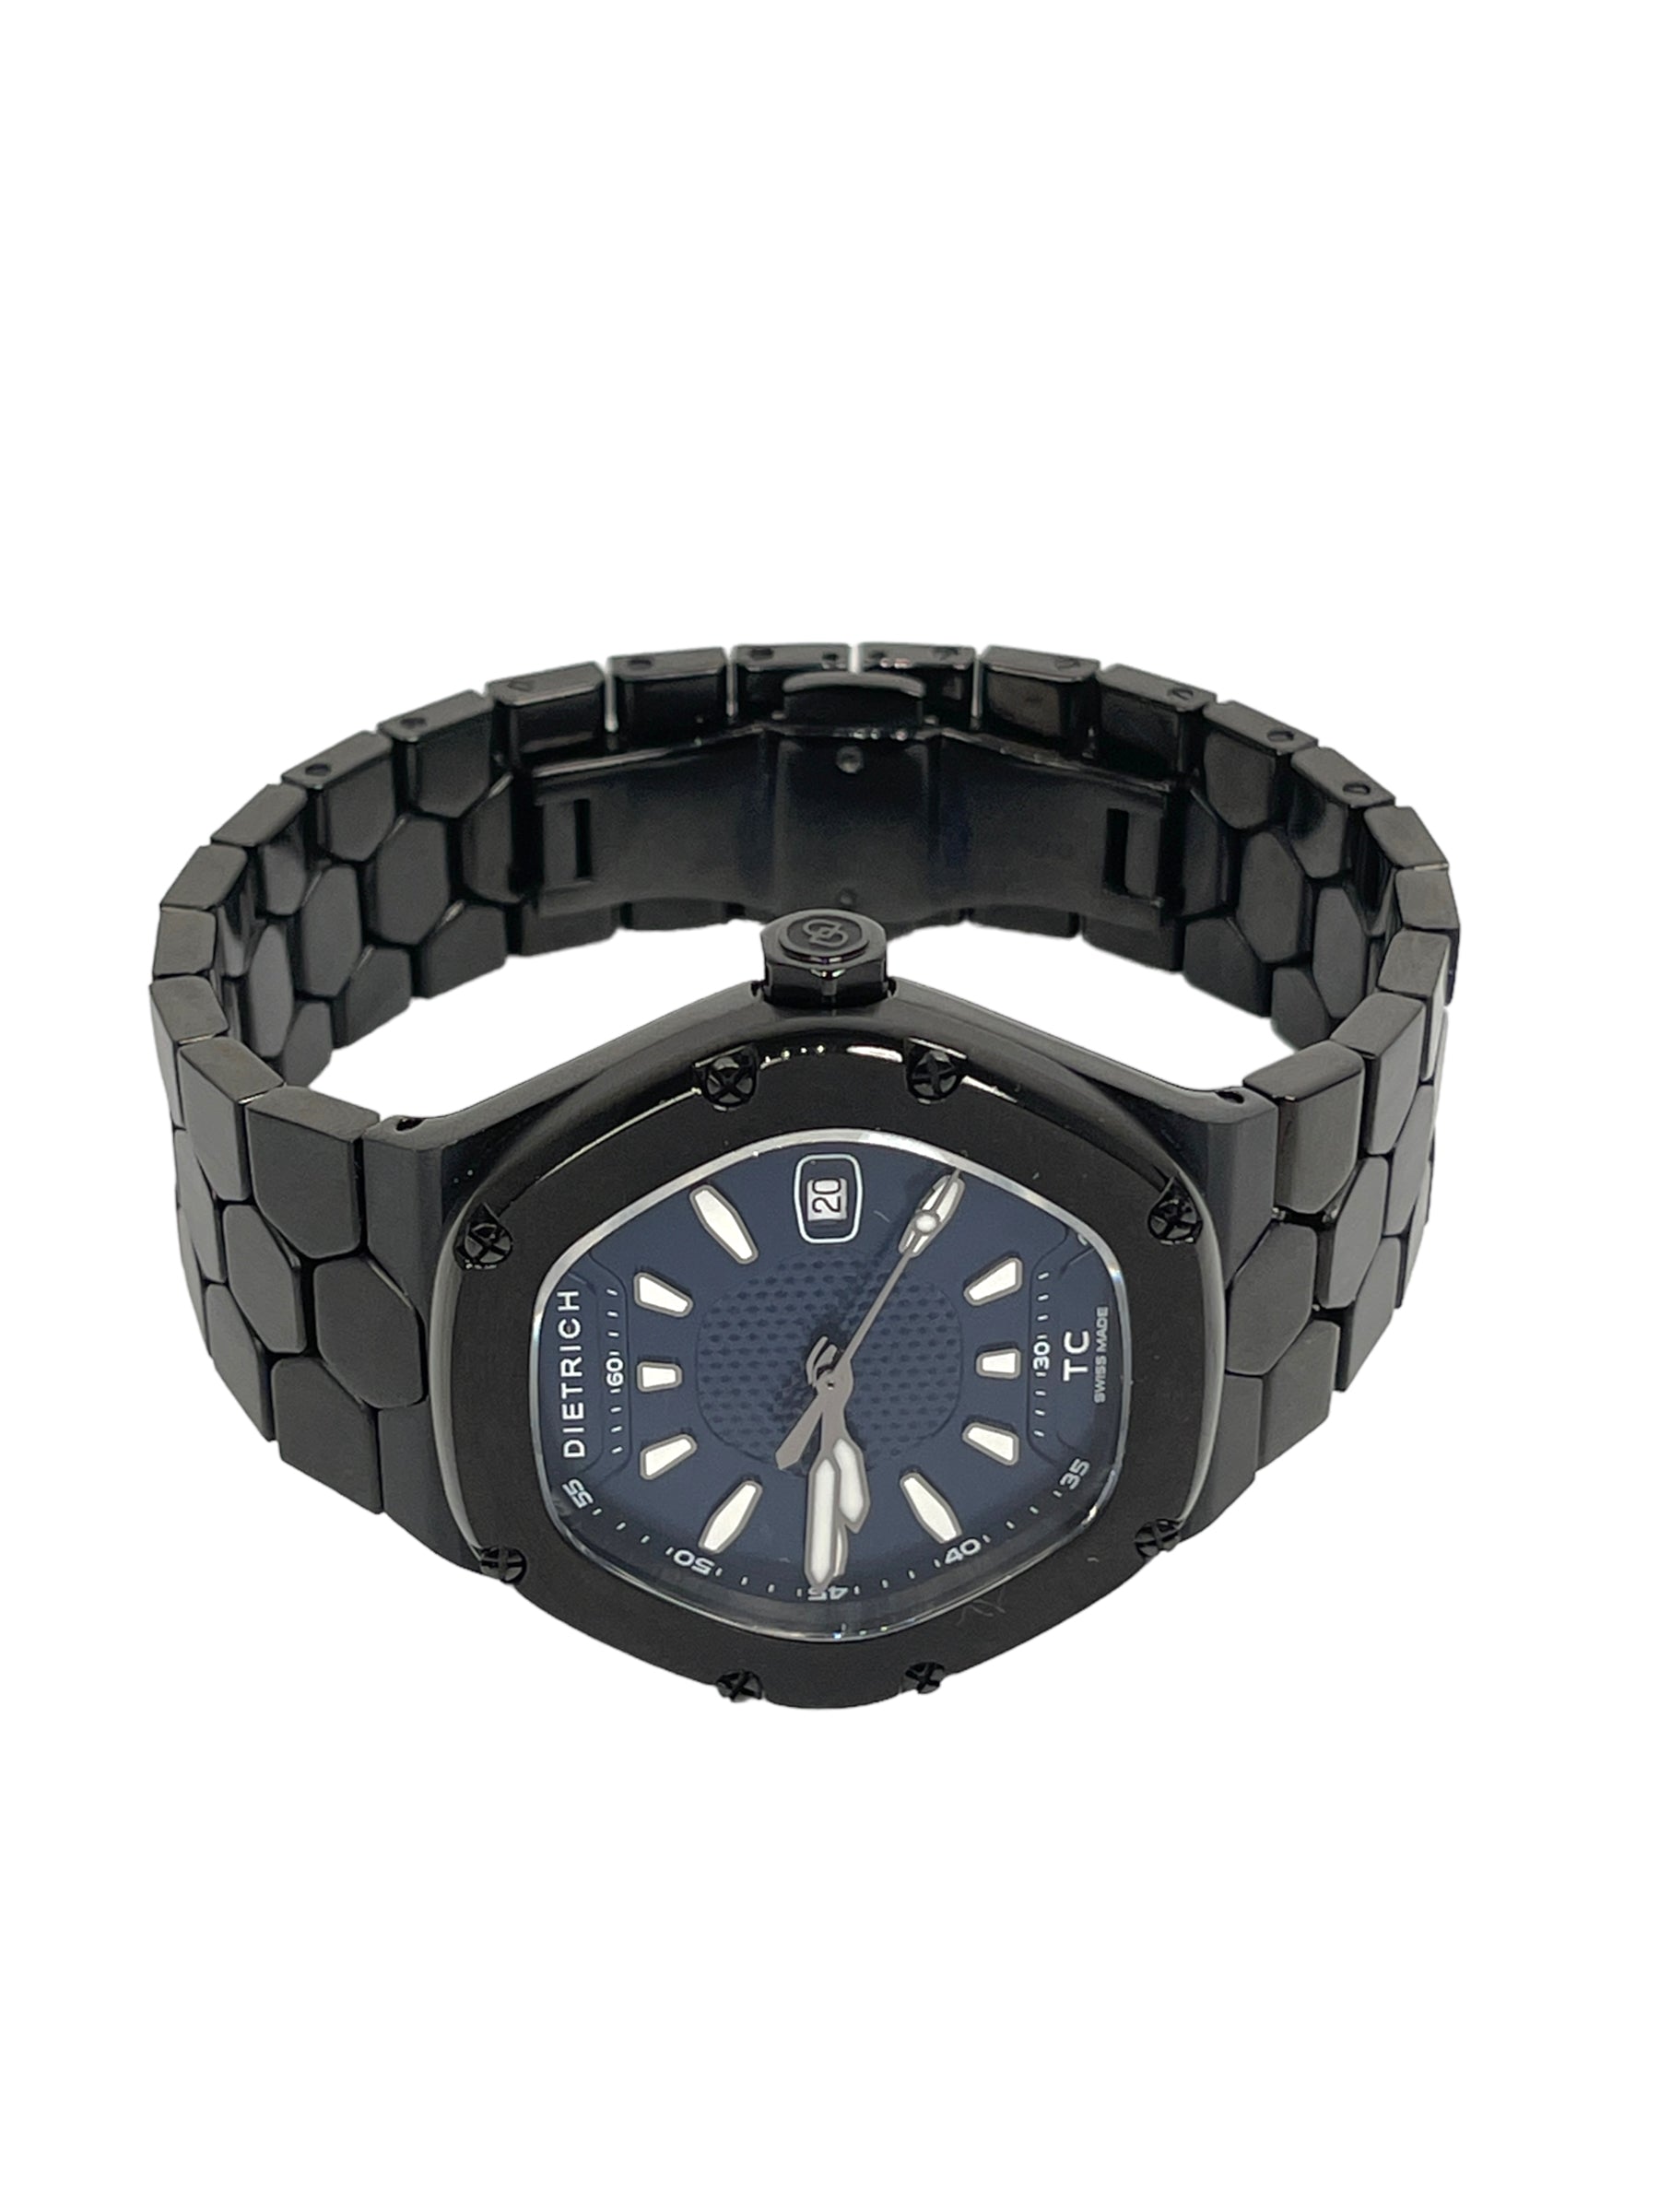 Dietrich TC-1 Time Companion Black Stainless Steel Wrist Watch 42mm — Genuine Design luxury consignment Calgary, Alberta, Canada New and pre-owned clothing, shoes, accessories.